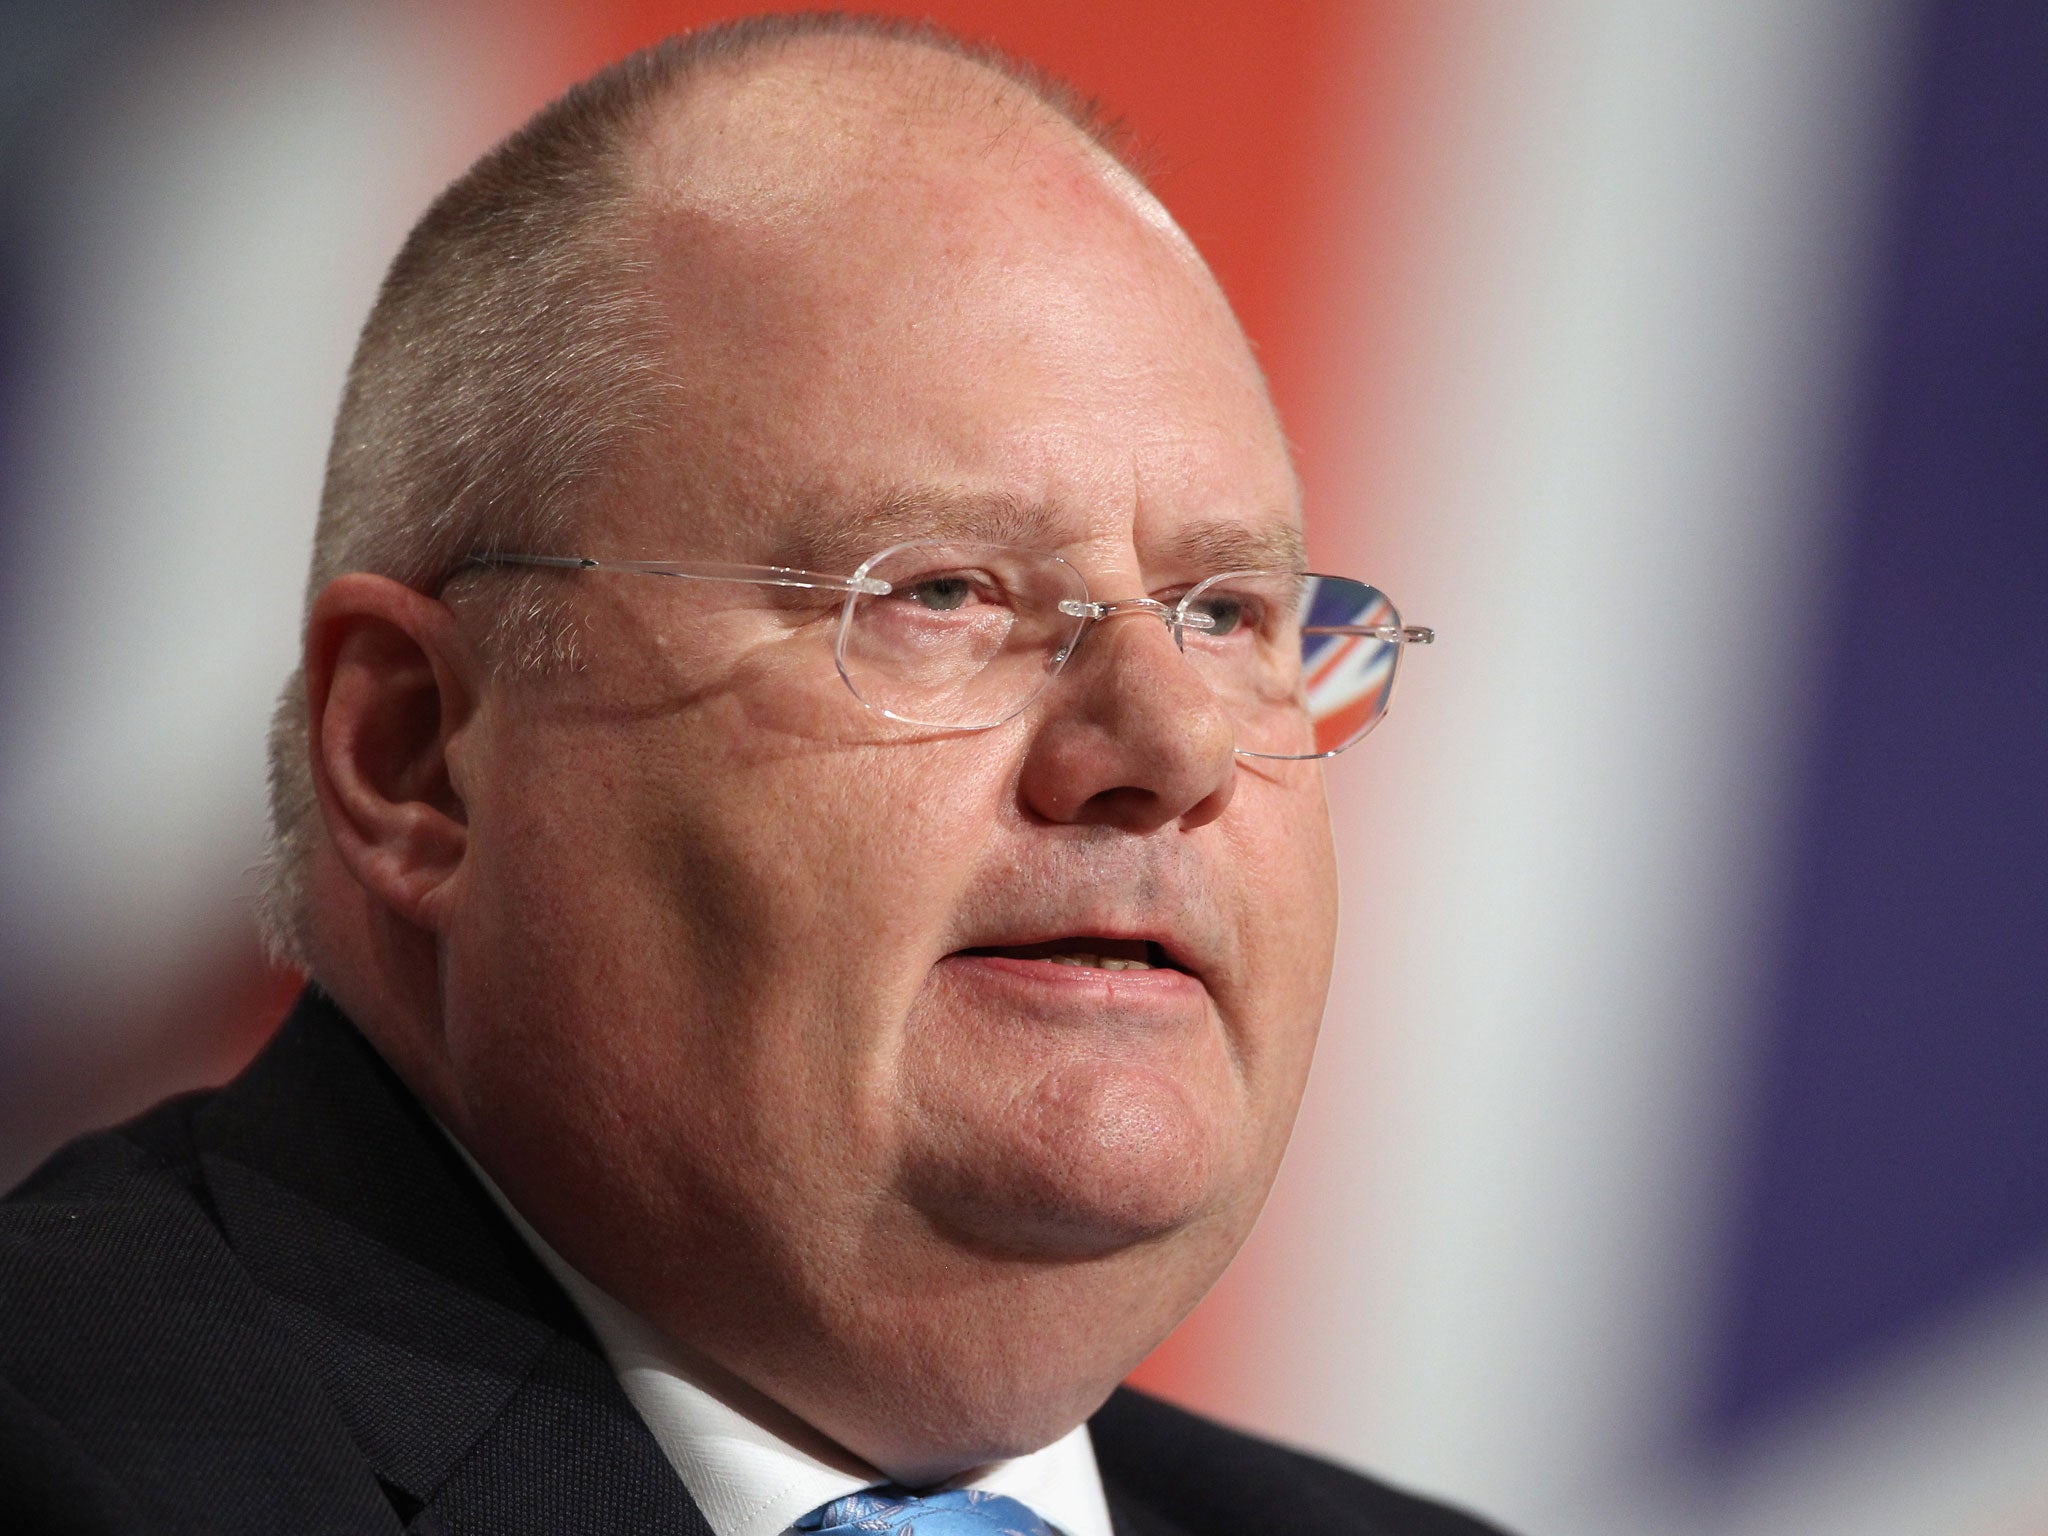 Eric Pickles said he did not believe any measures in a mooted communications data bill, dubbed the 'snooper's charter', would have prevented the death of the soldier in Woolwich